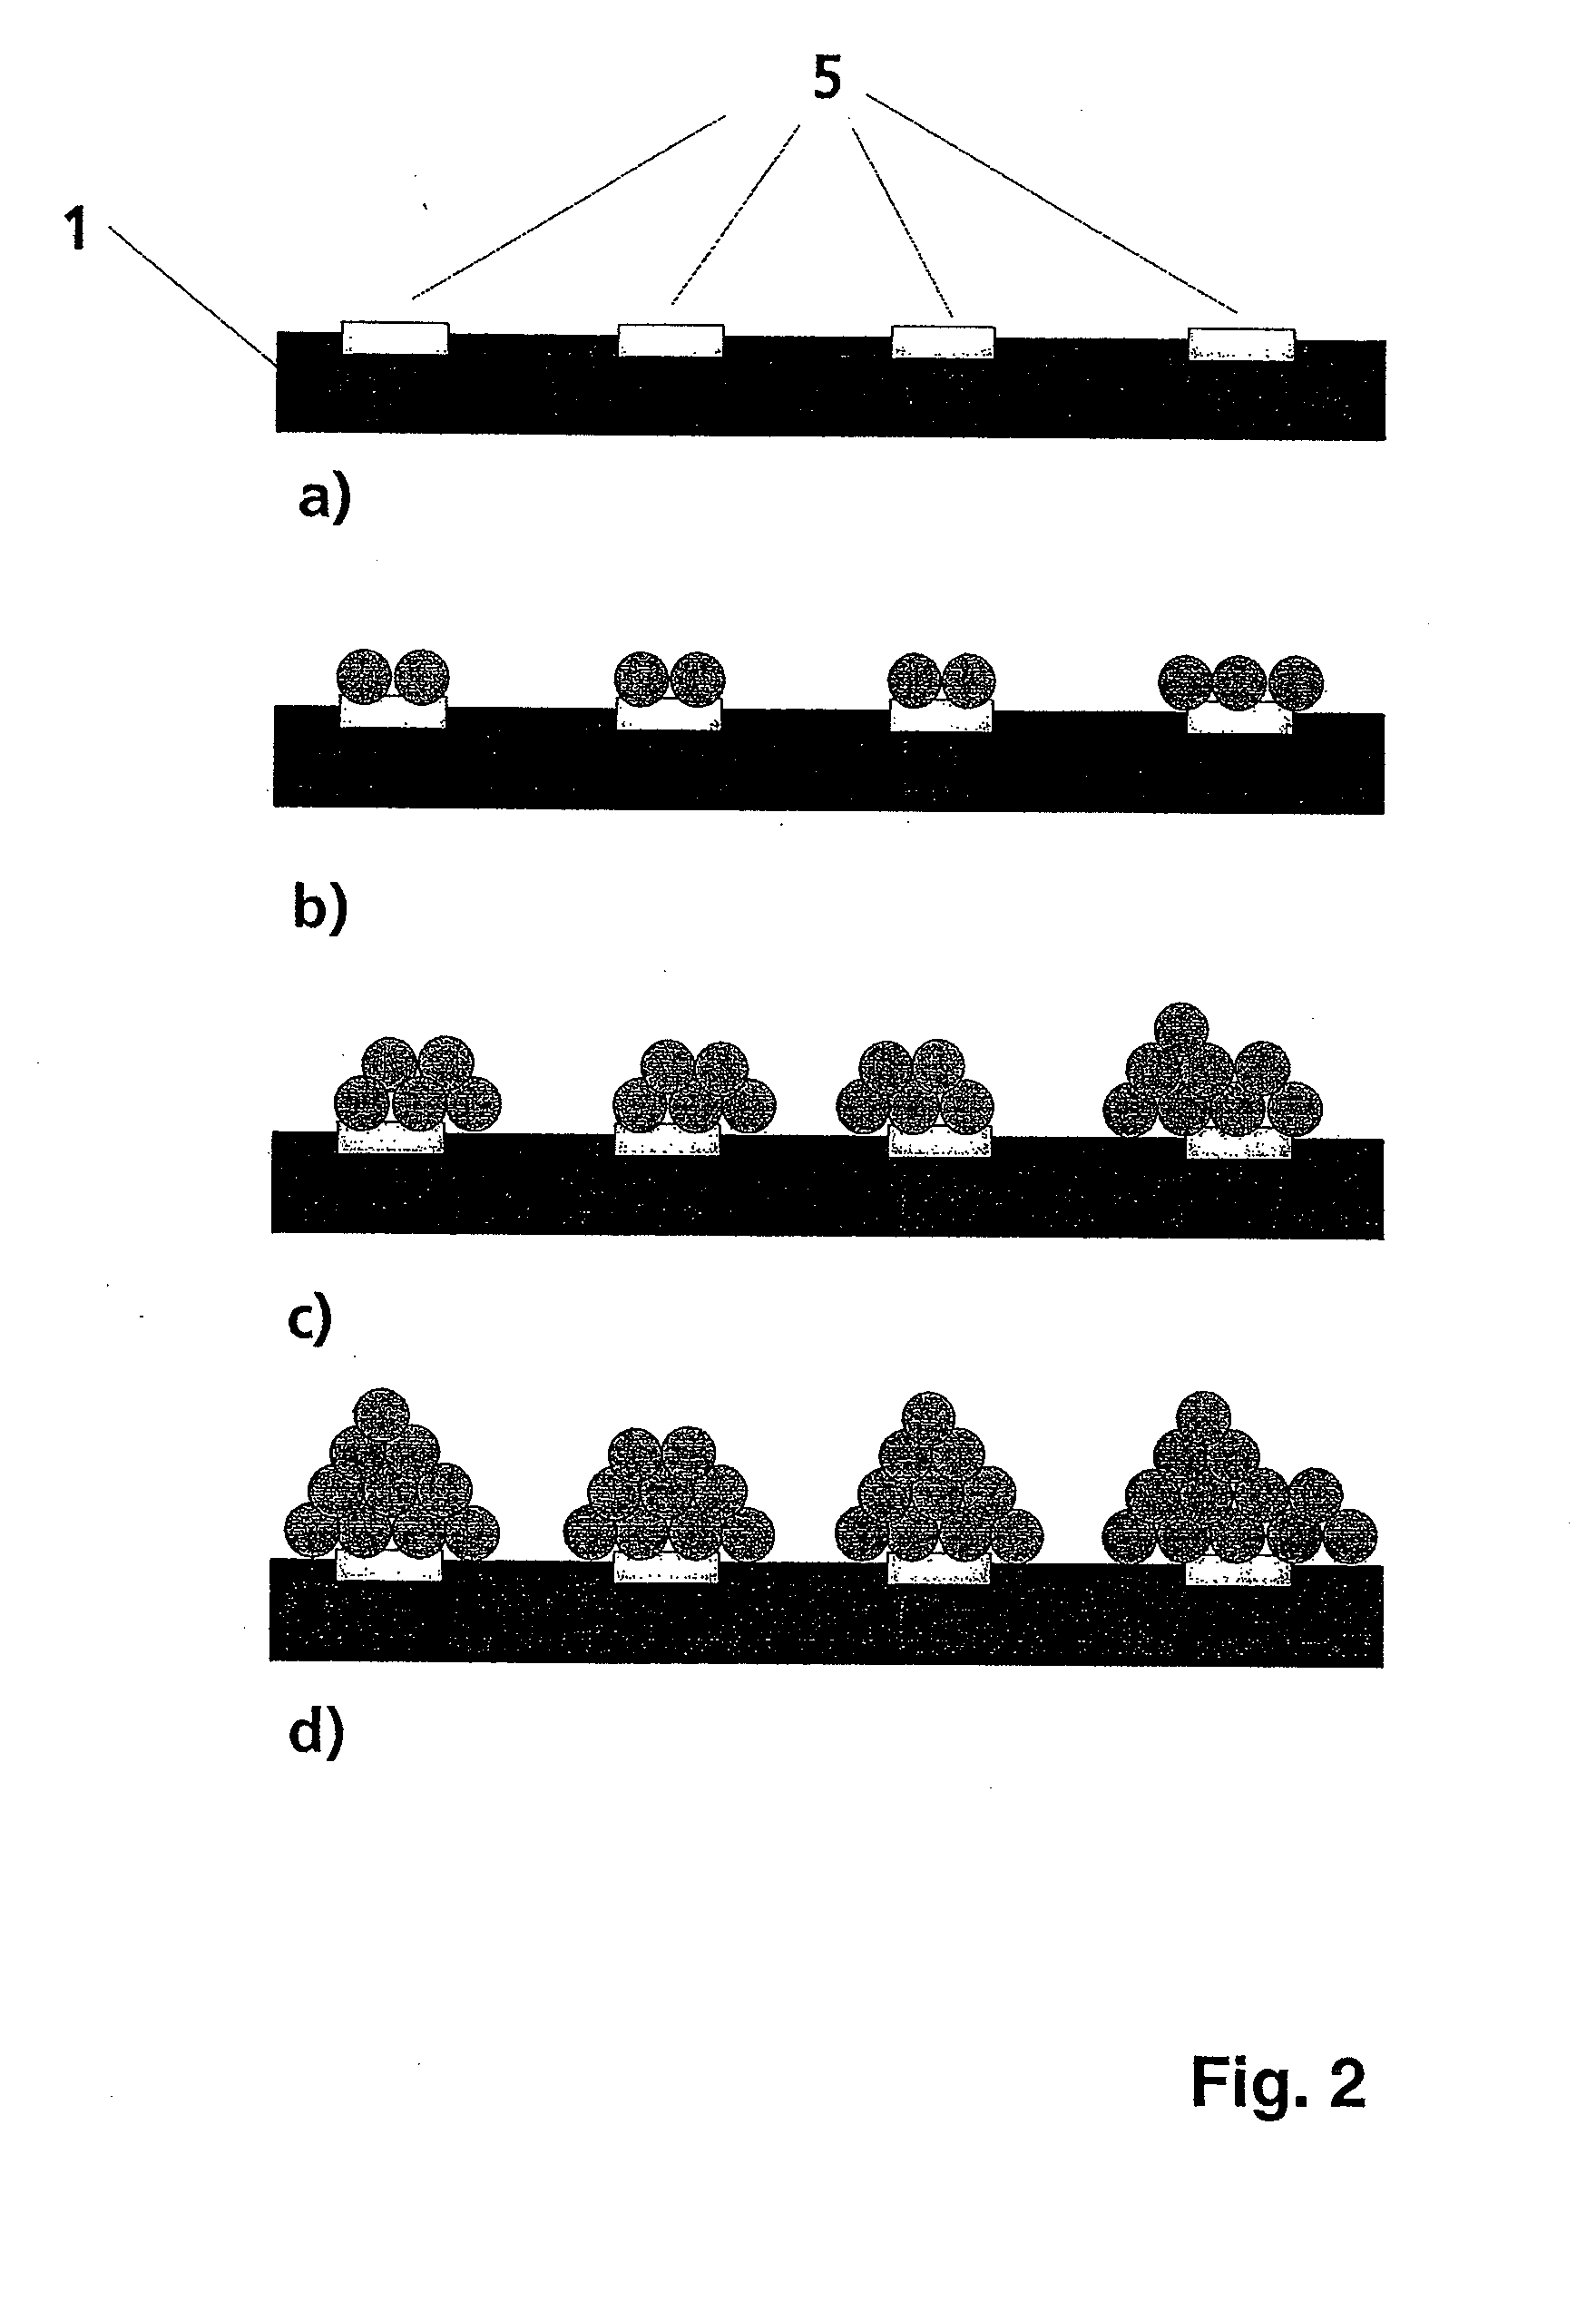 METHOD FOR PRODUCING A TOOL WHICH CAN BE USED TO CREATE OPTICALLY ACTIVE SURFACE STRUCTRES IN THE SUB-nuM RANGE AND A CORRESPONDING TOOL